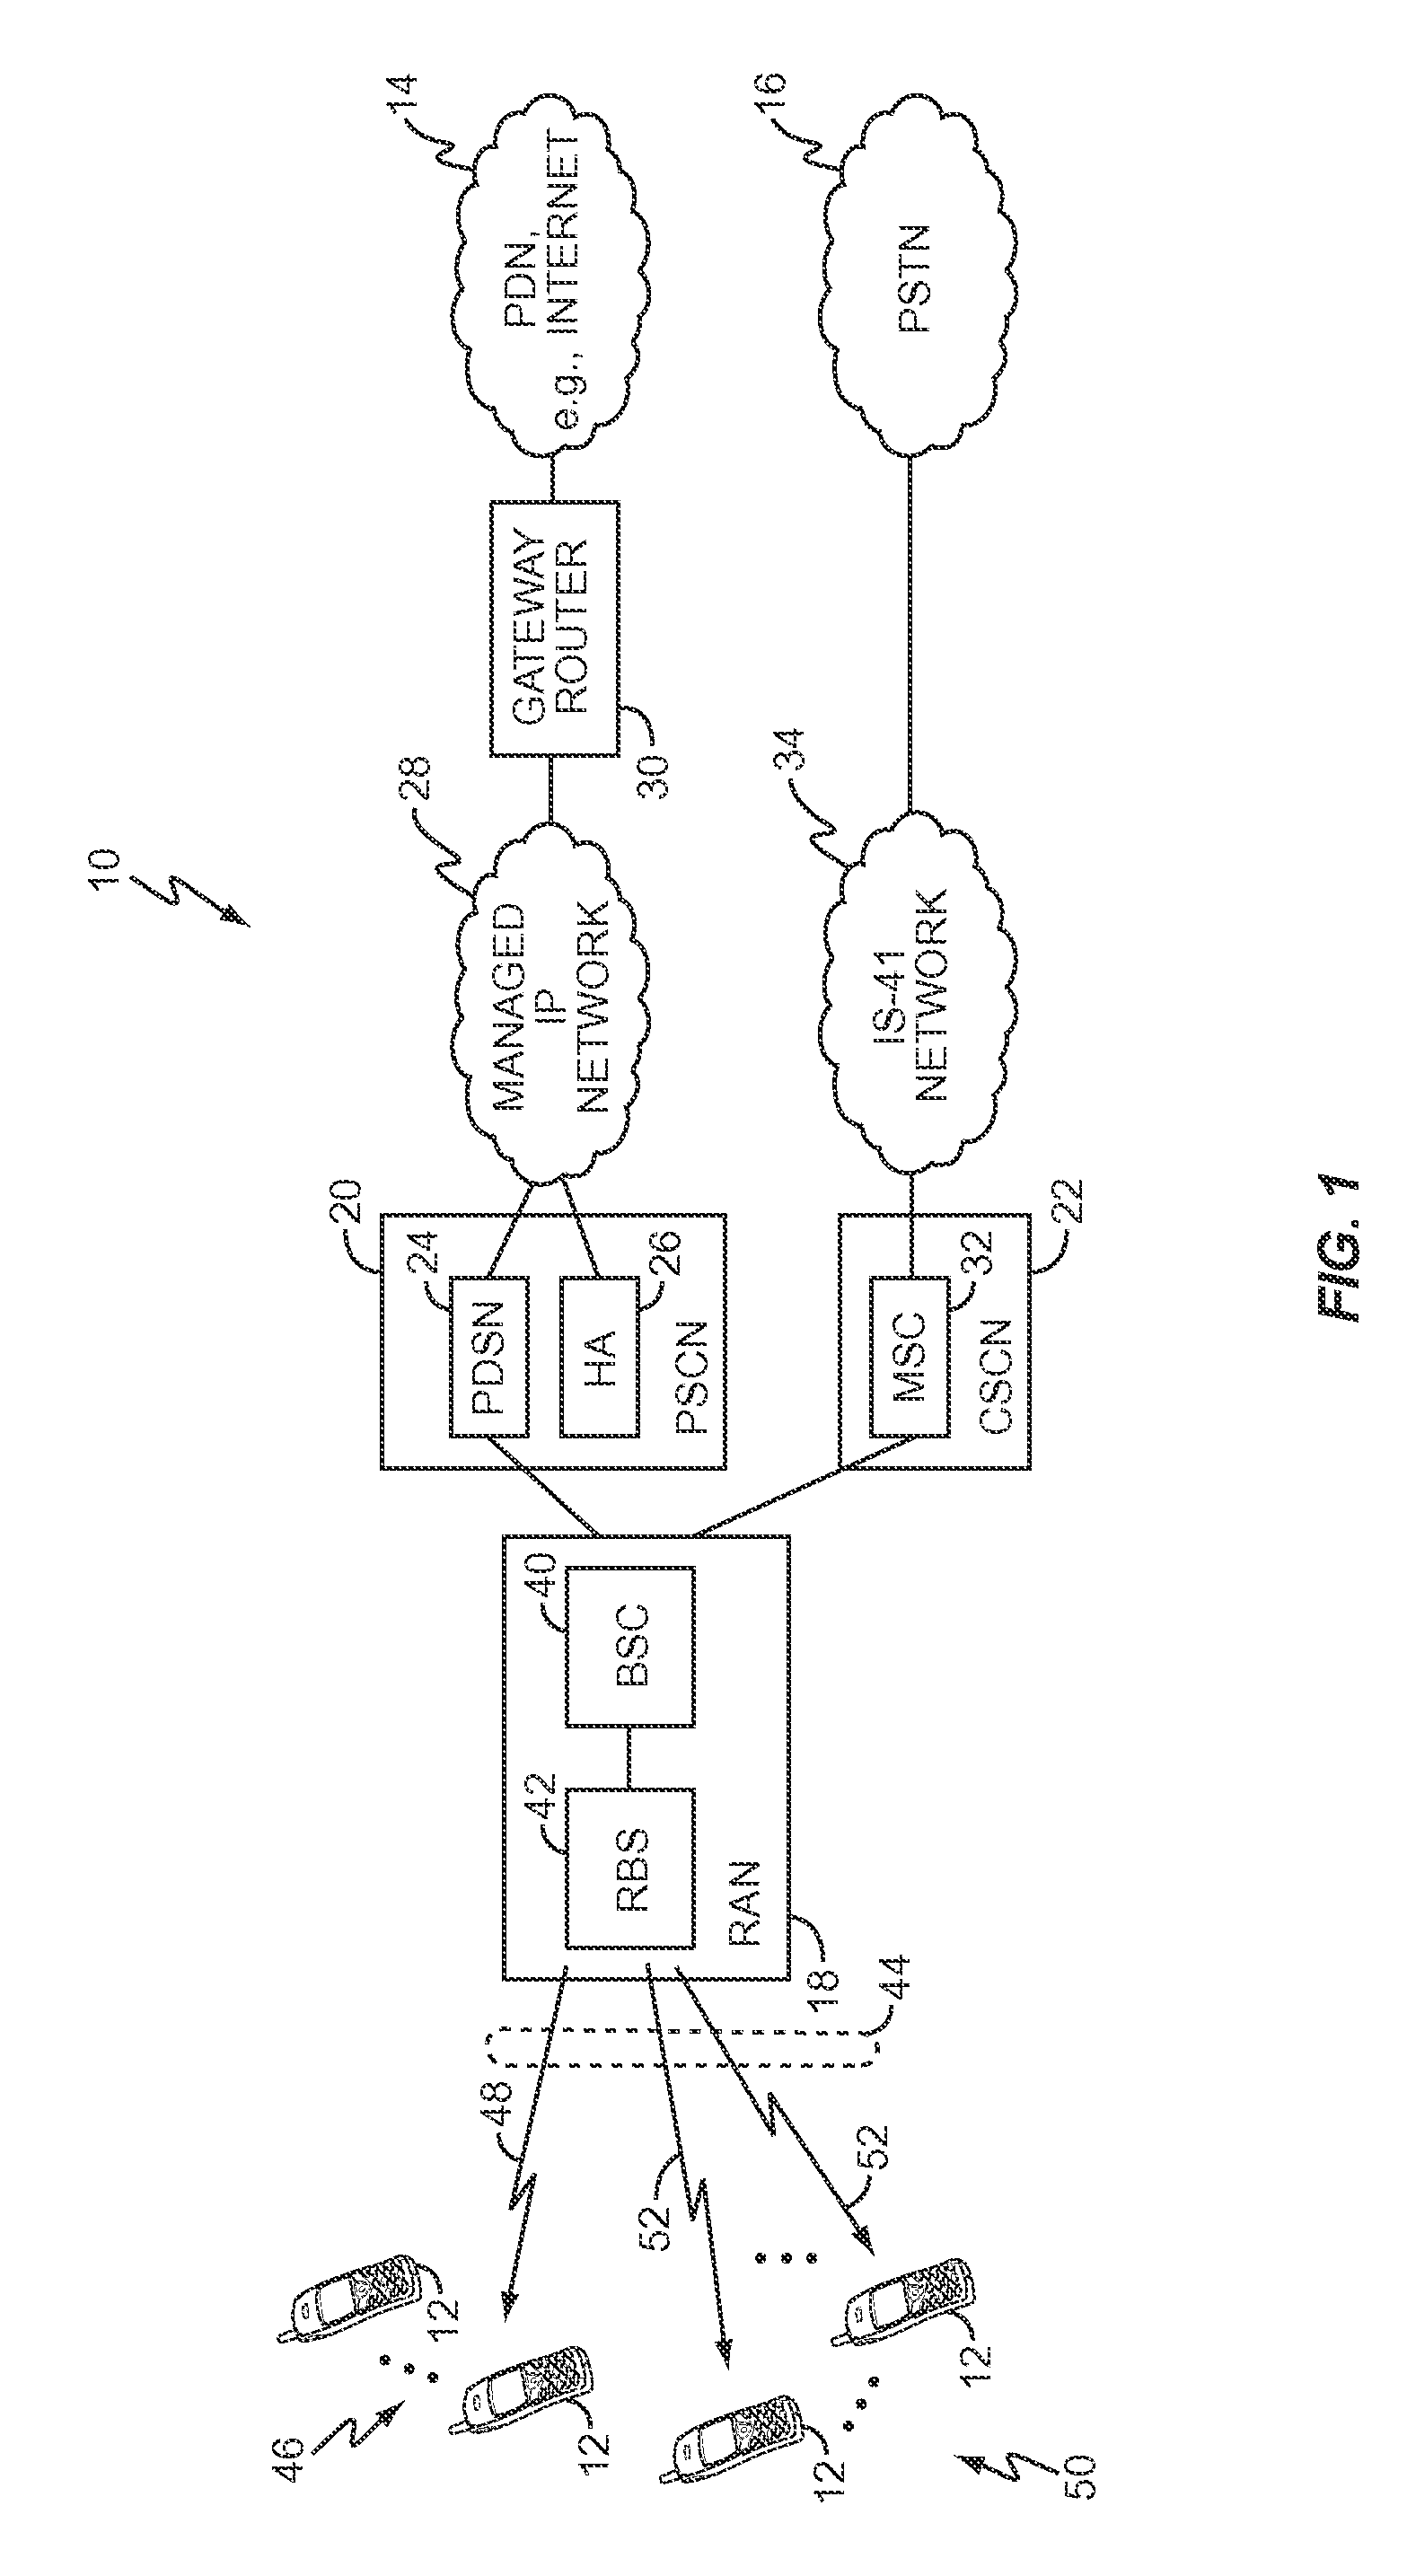 System and Method for Wireless Network Congestion Control